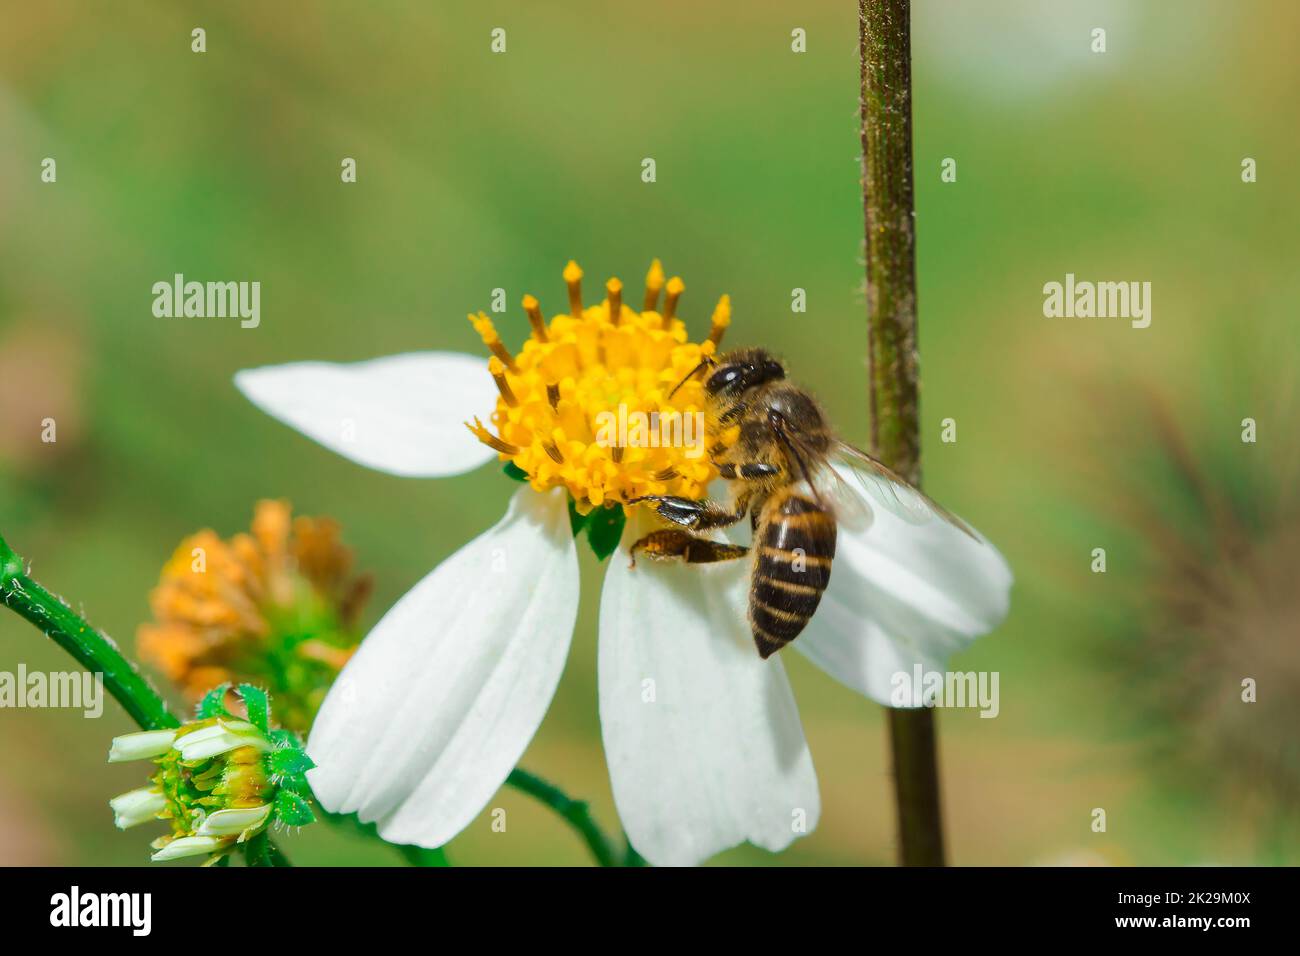 The bees are on Bidens pilosa that is blooming in nature. Stock Photo